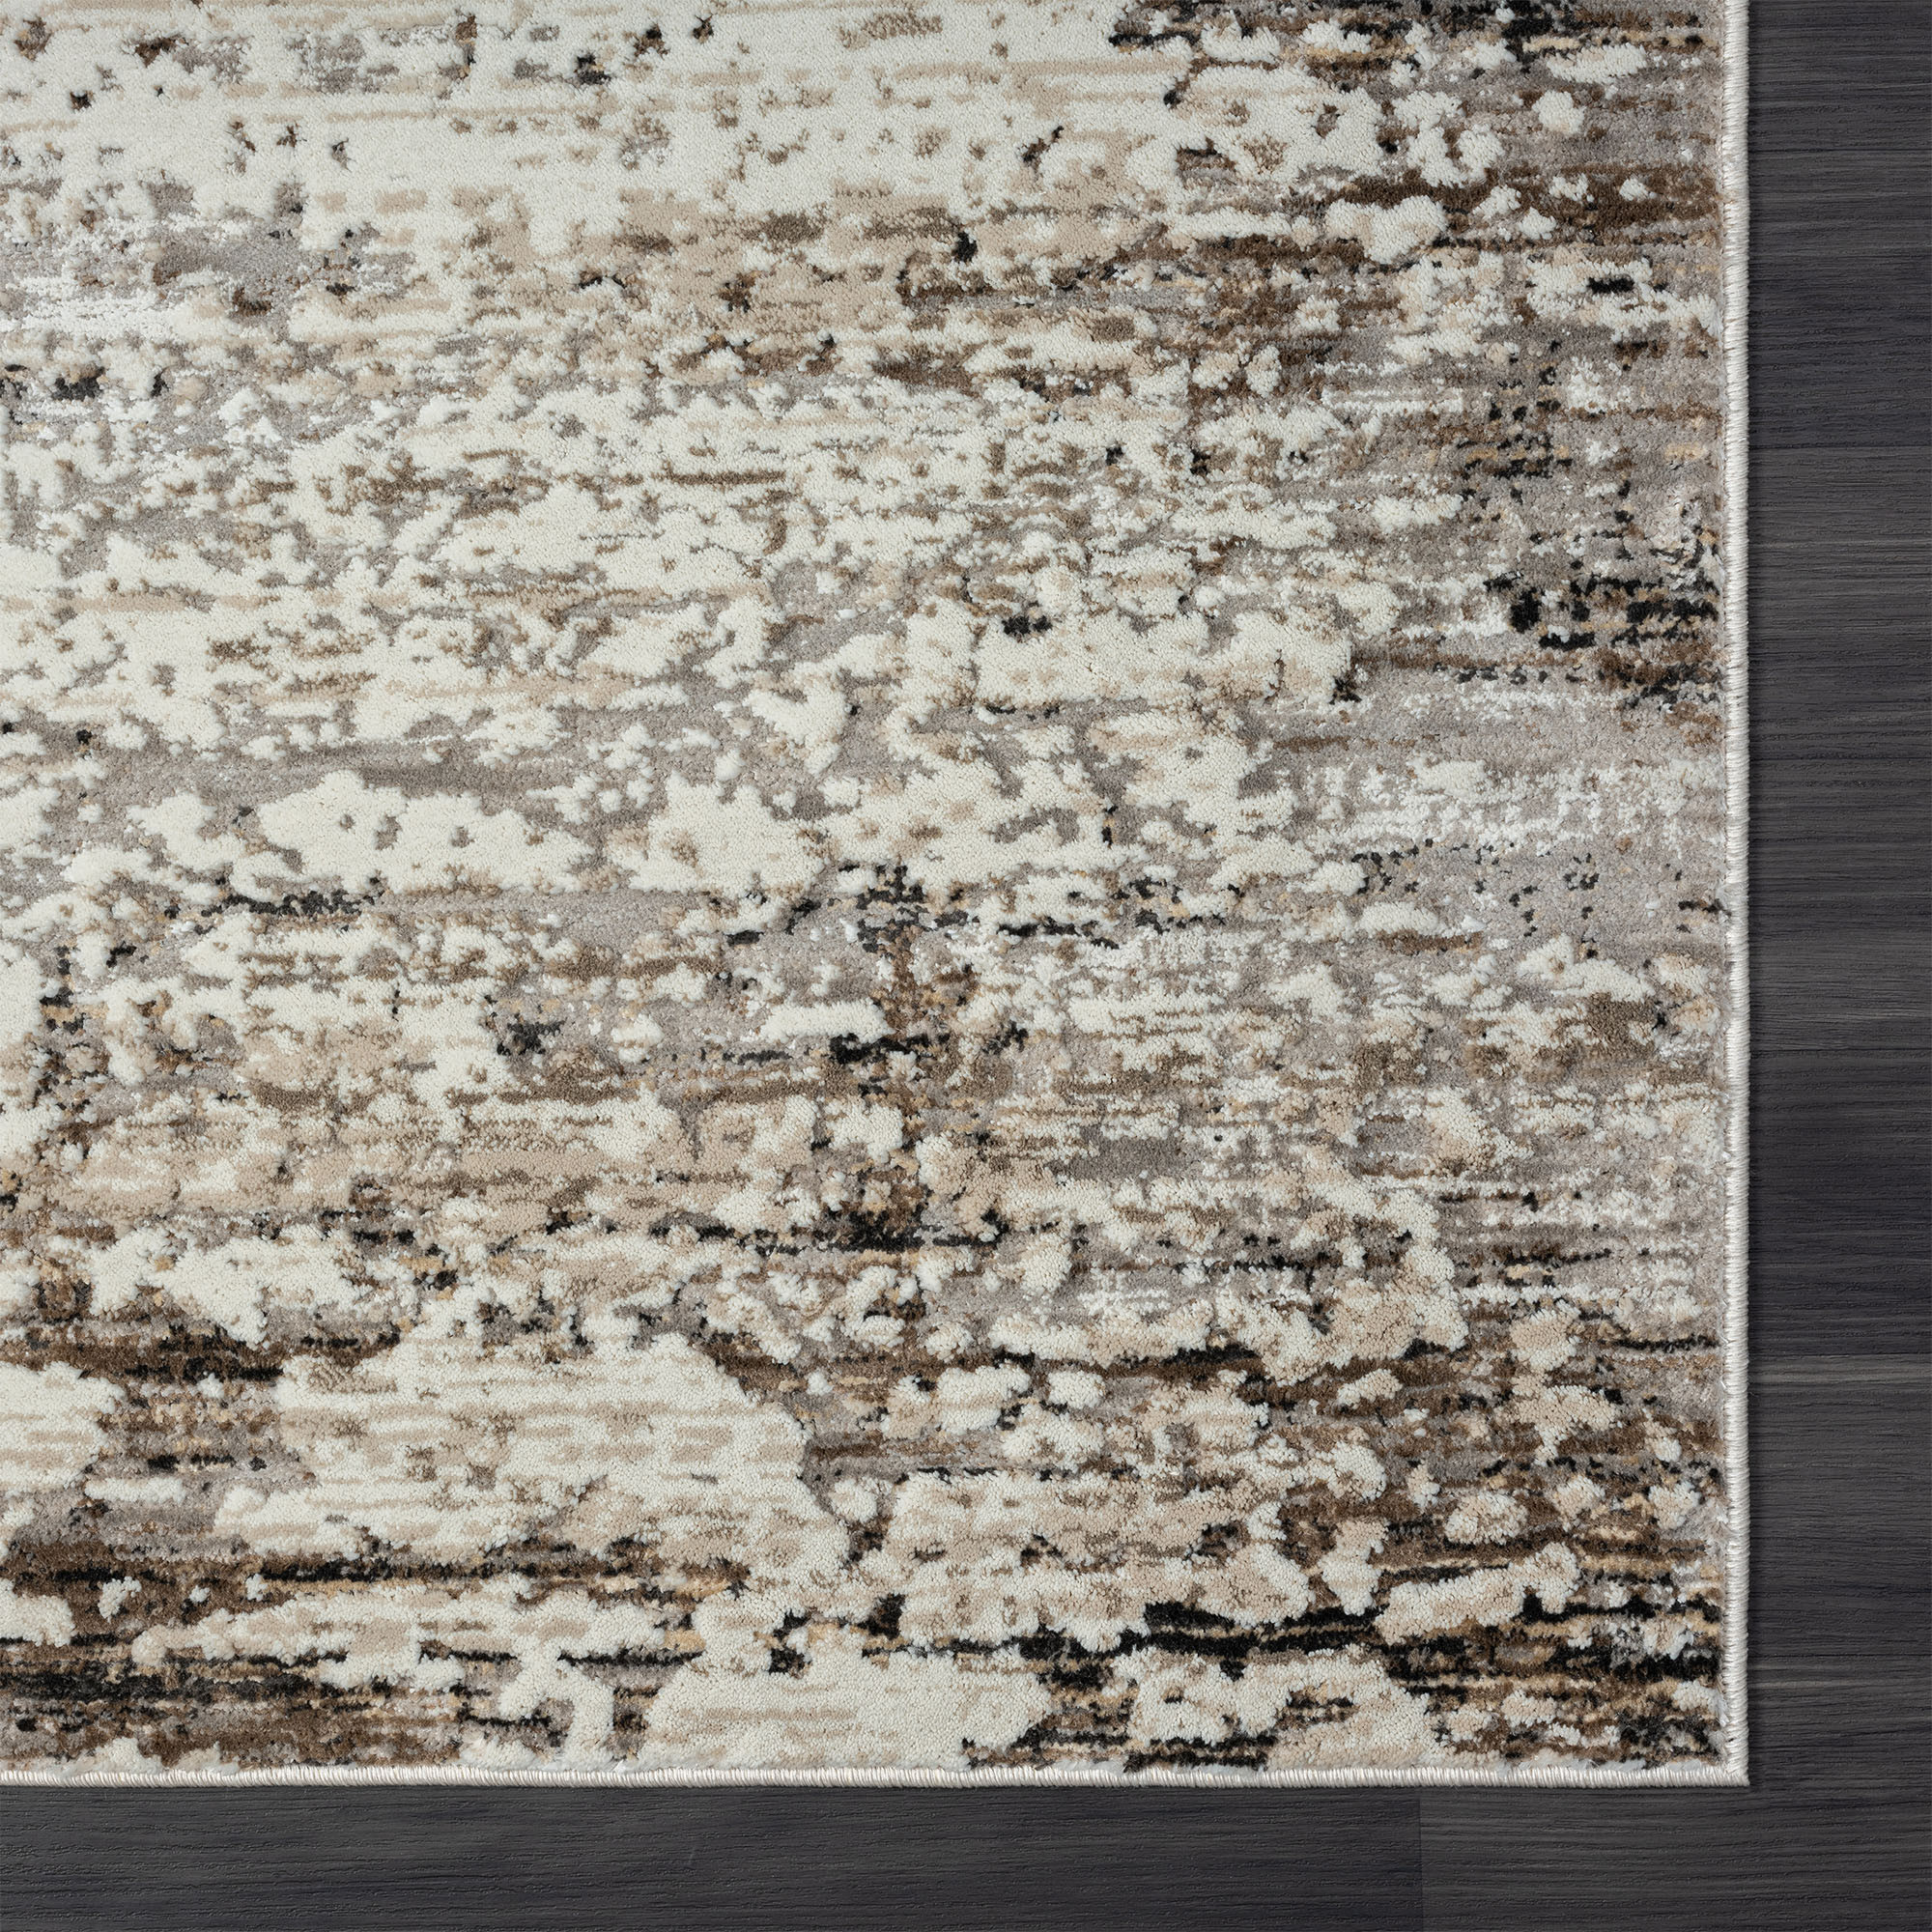 4' X 6' Beige Abstract Distressed Area Rug-515837-1